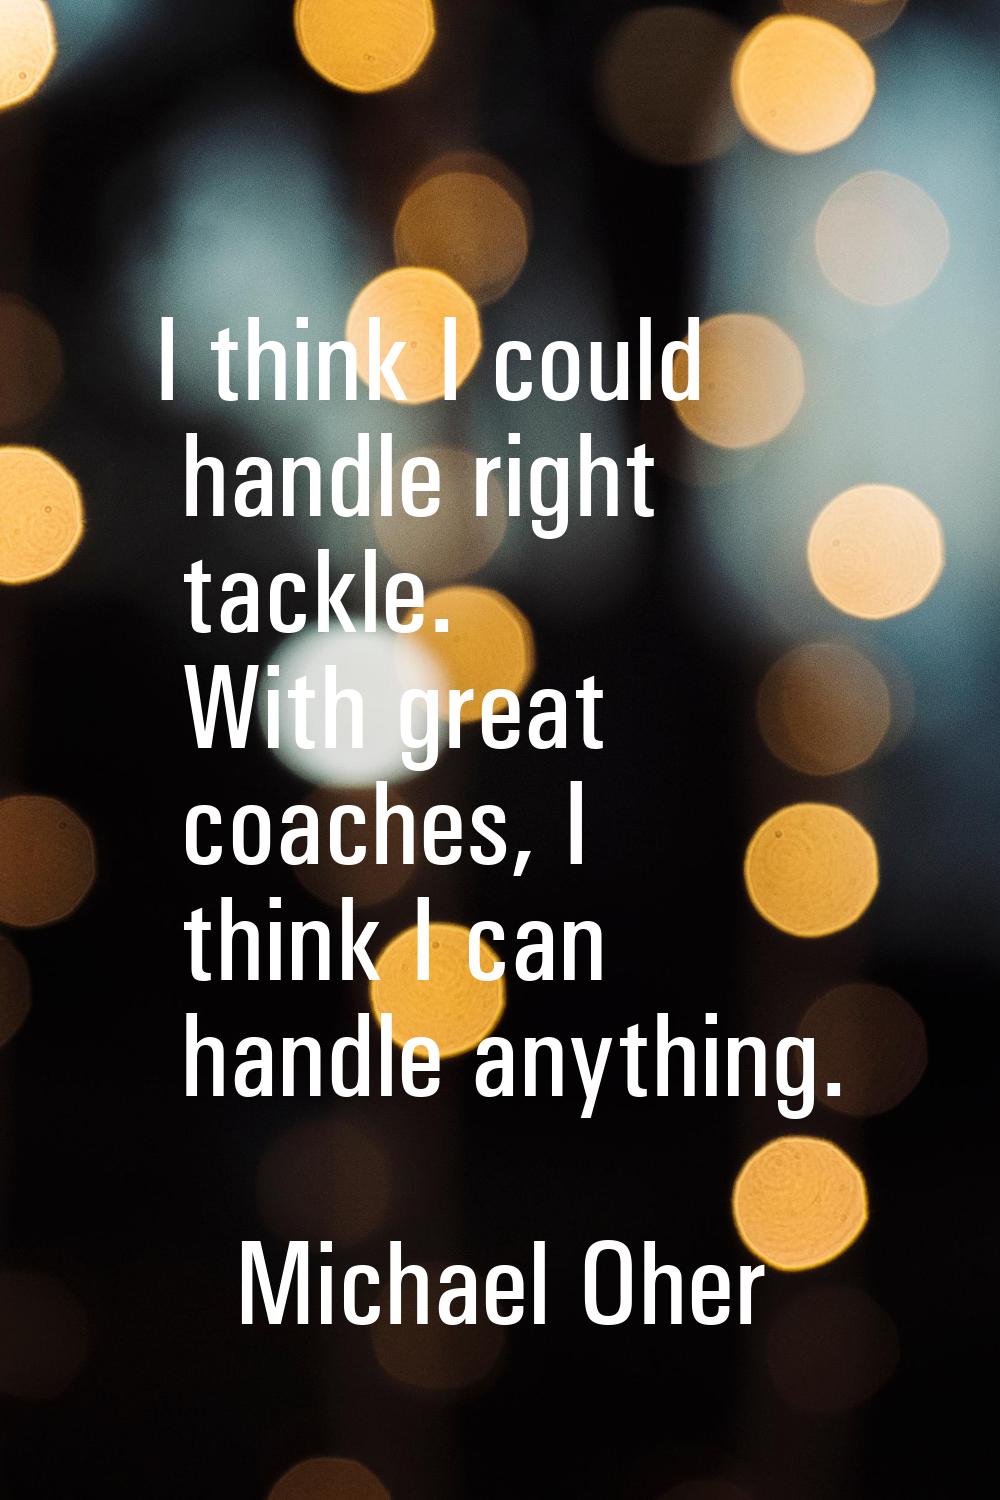 I think I could handle right tackle. With great coaches, I think I can handle anything.